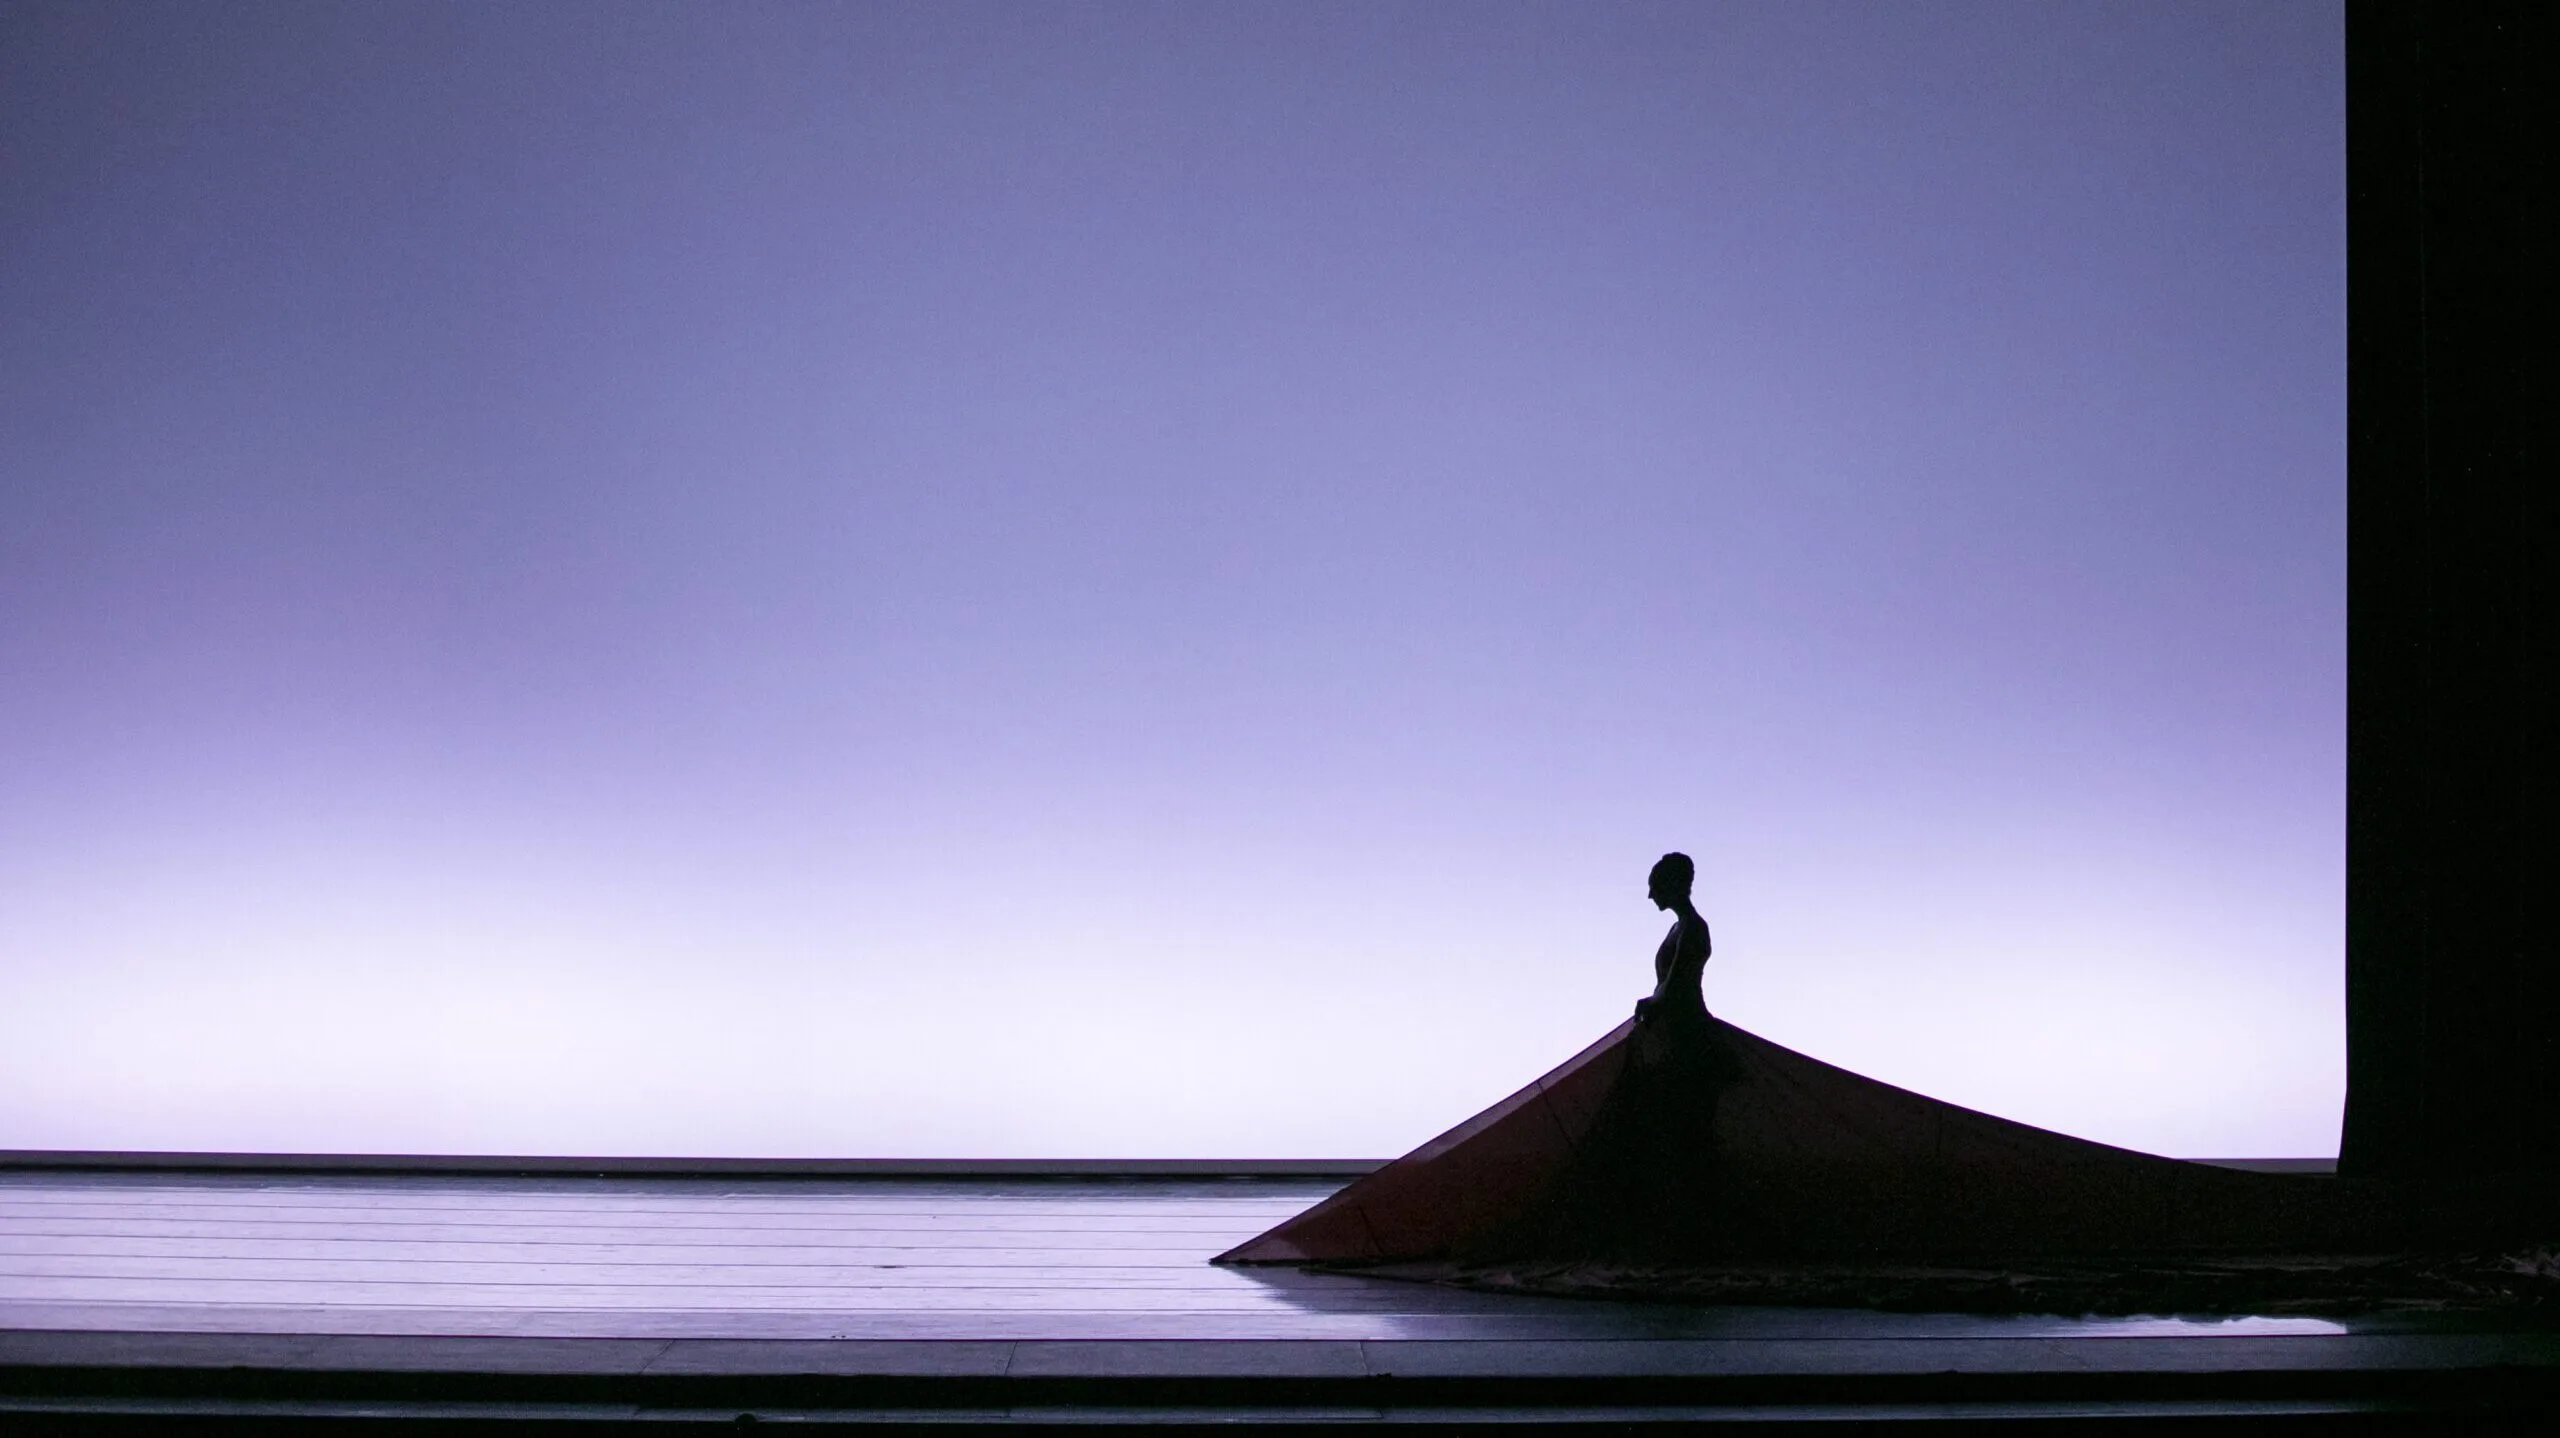 Dancer Laura Tisserand walks across a darkened stage in a magnificent, trailing dress. Only her outline is visible